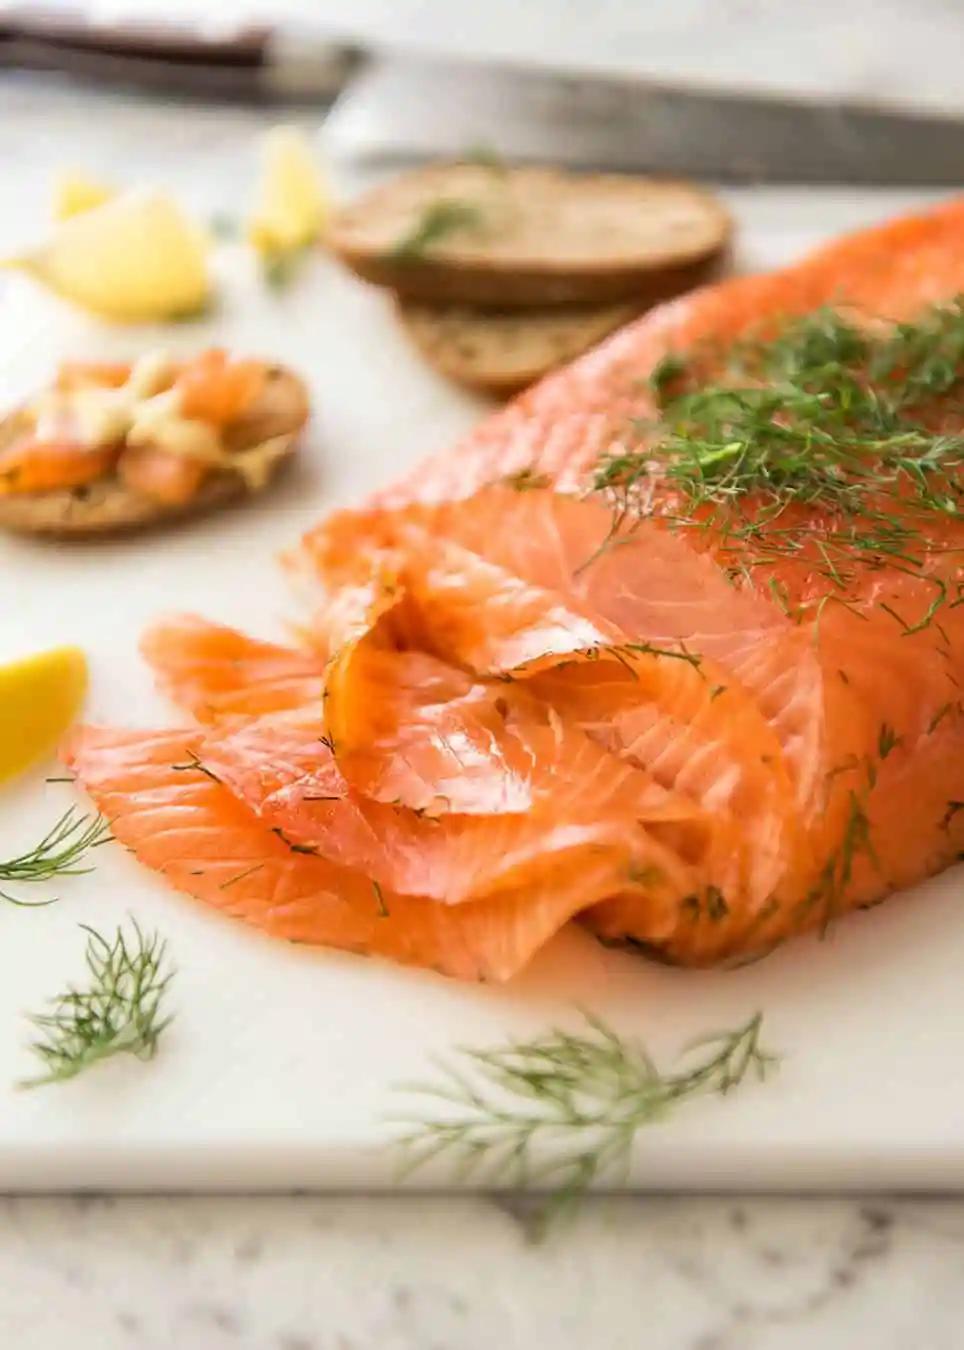 dry cured smoked salmon - What is the difference between wet cure and dry cure salmon